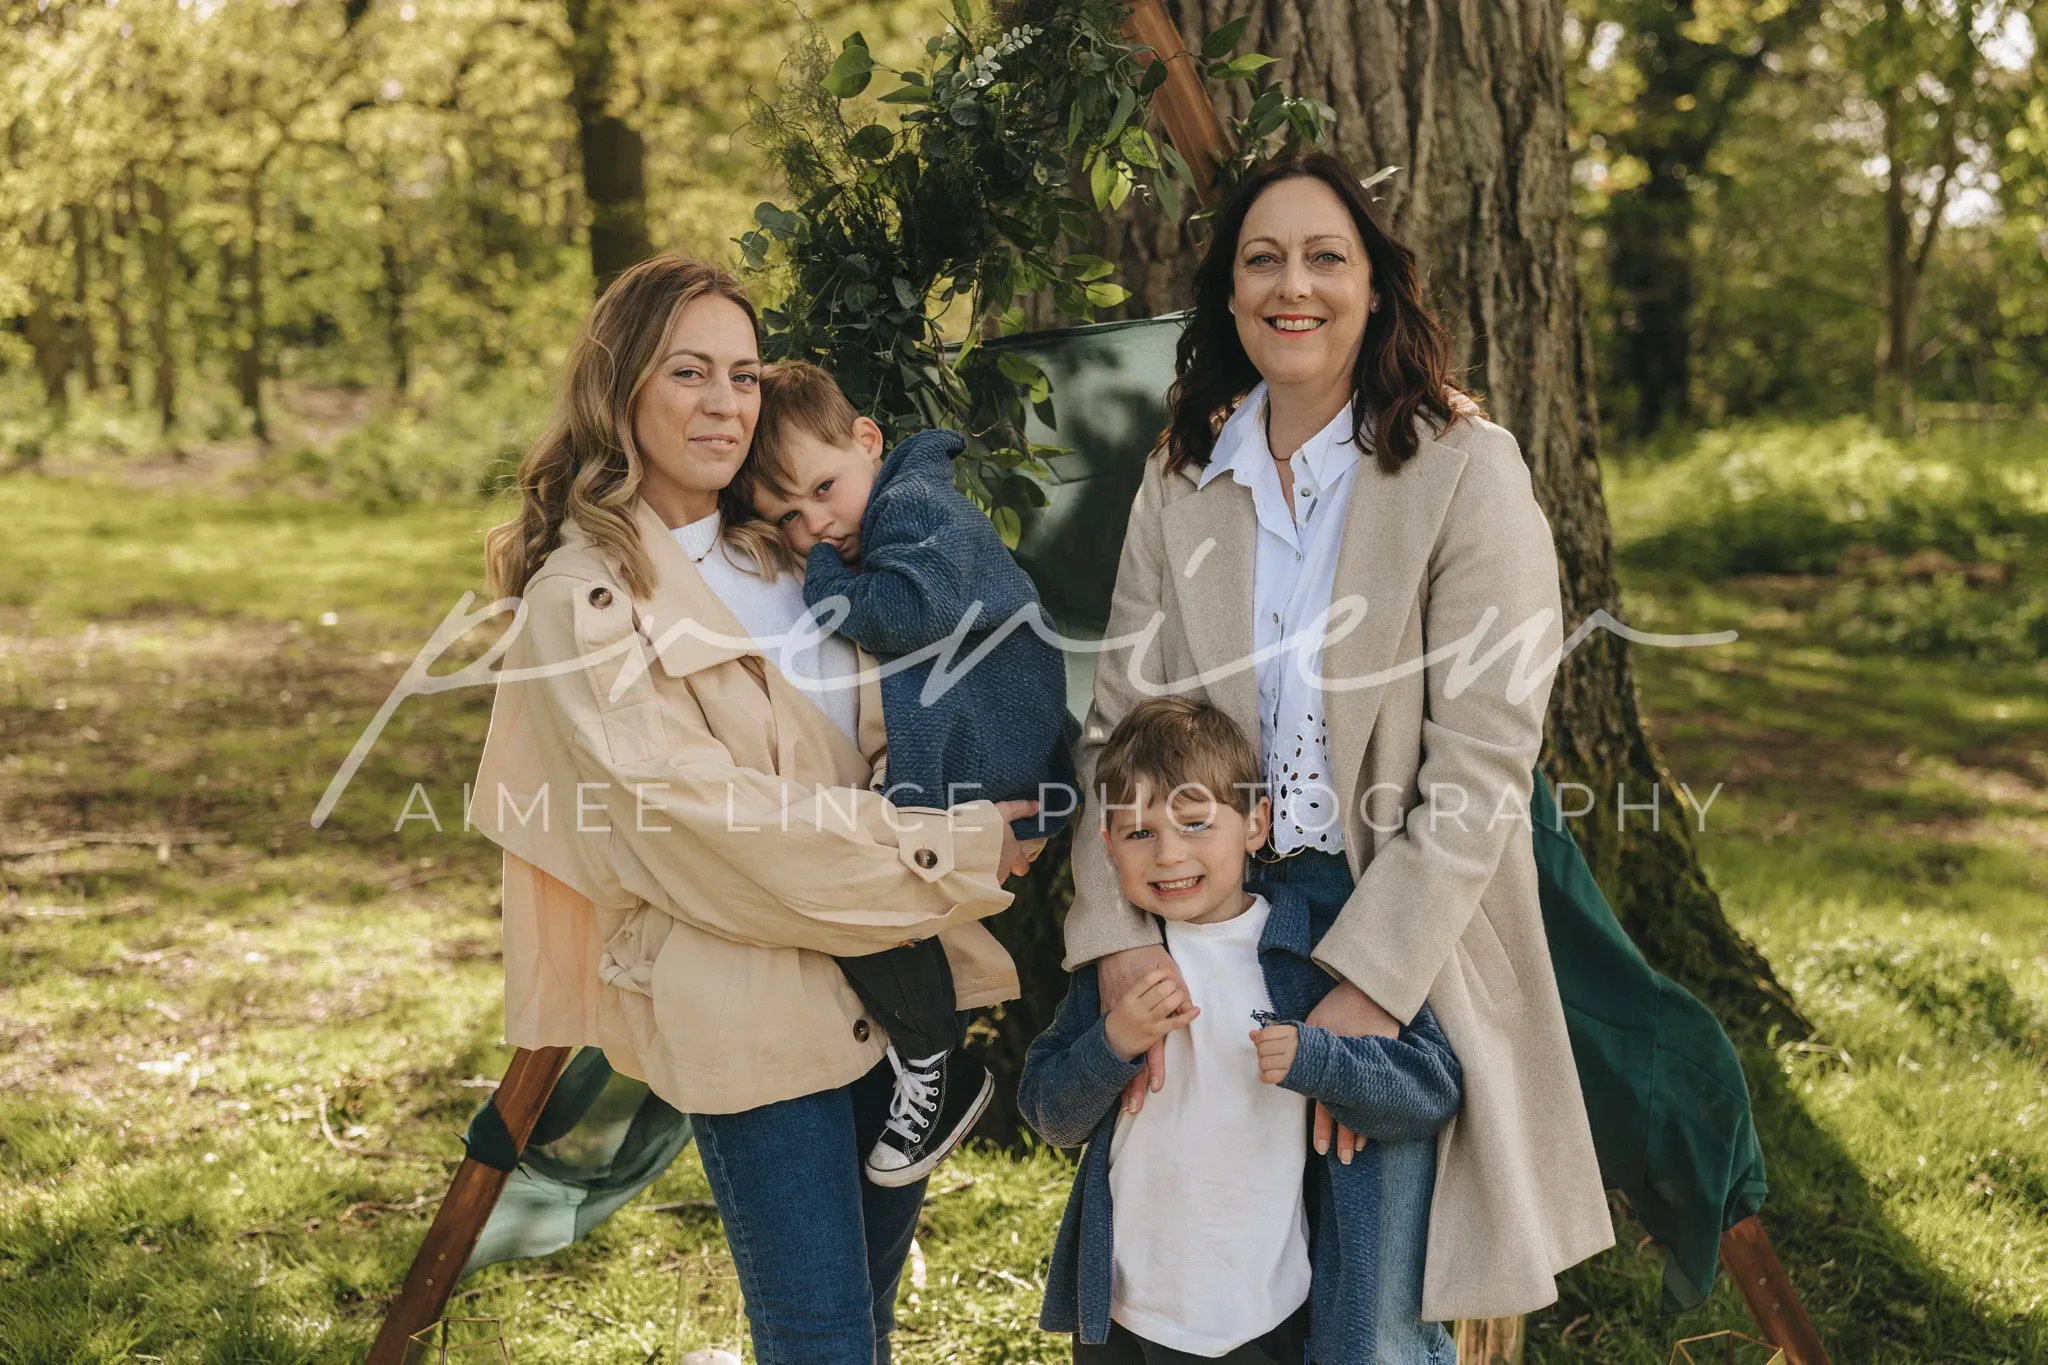 Three generations of women and a young boy in a lush green park. the grandmother and mother stand smiling while one child hugs the mother and another stands in front. all are dressed in casual, comfortable clothing.